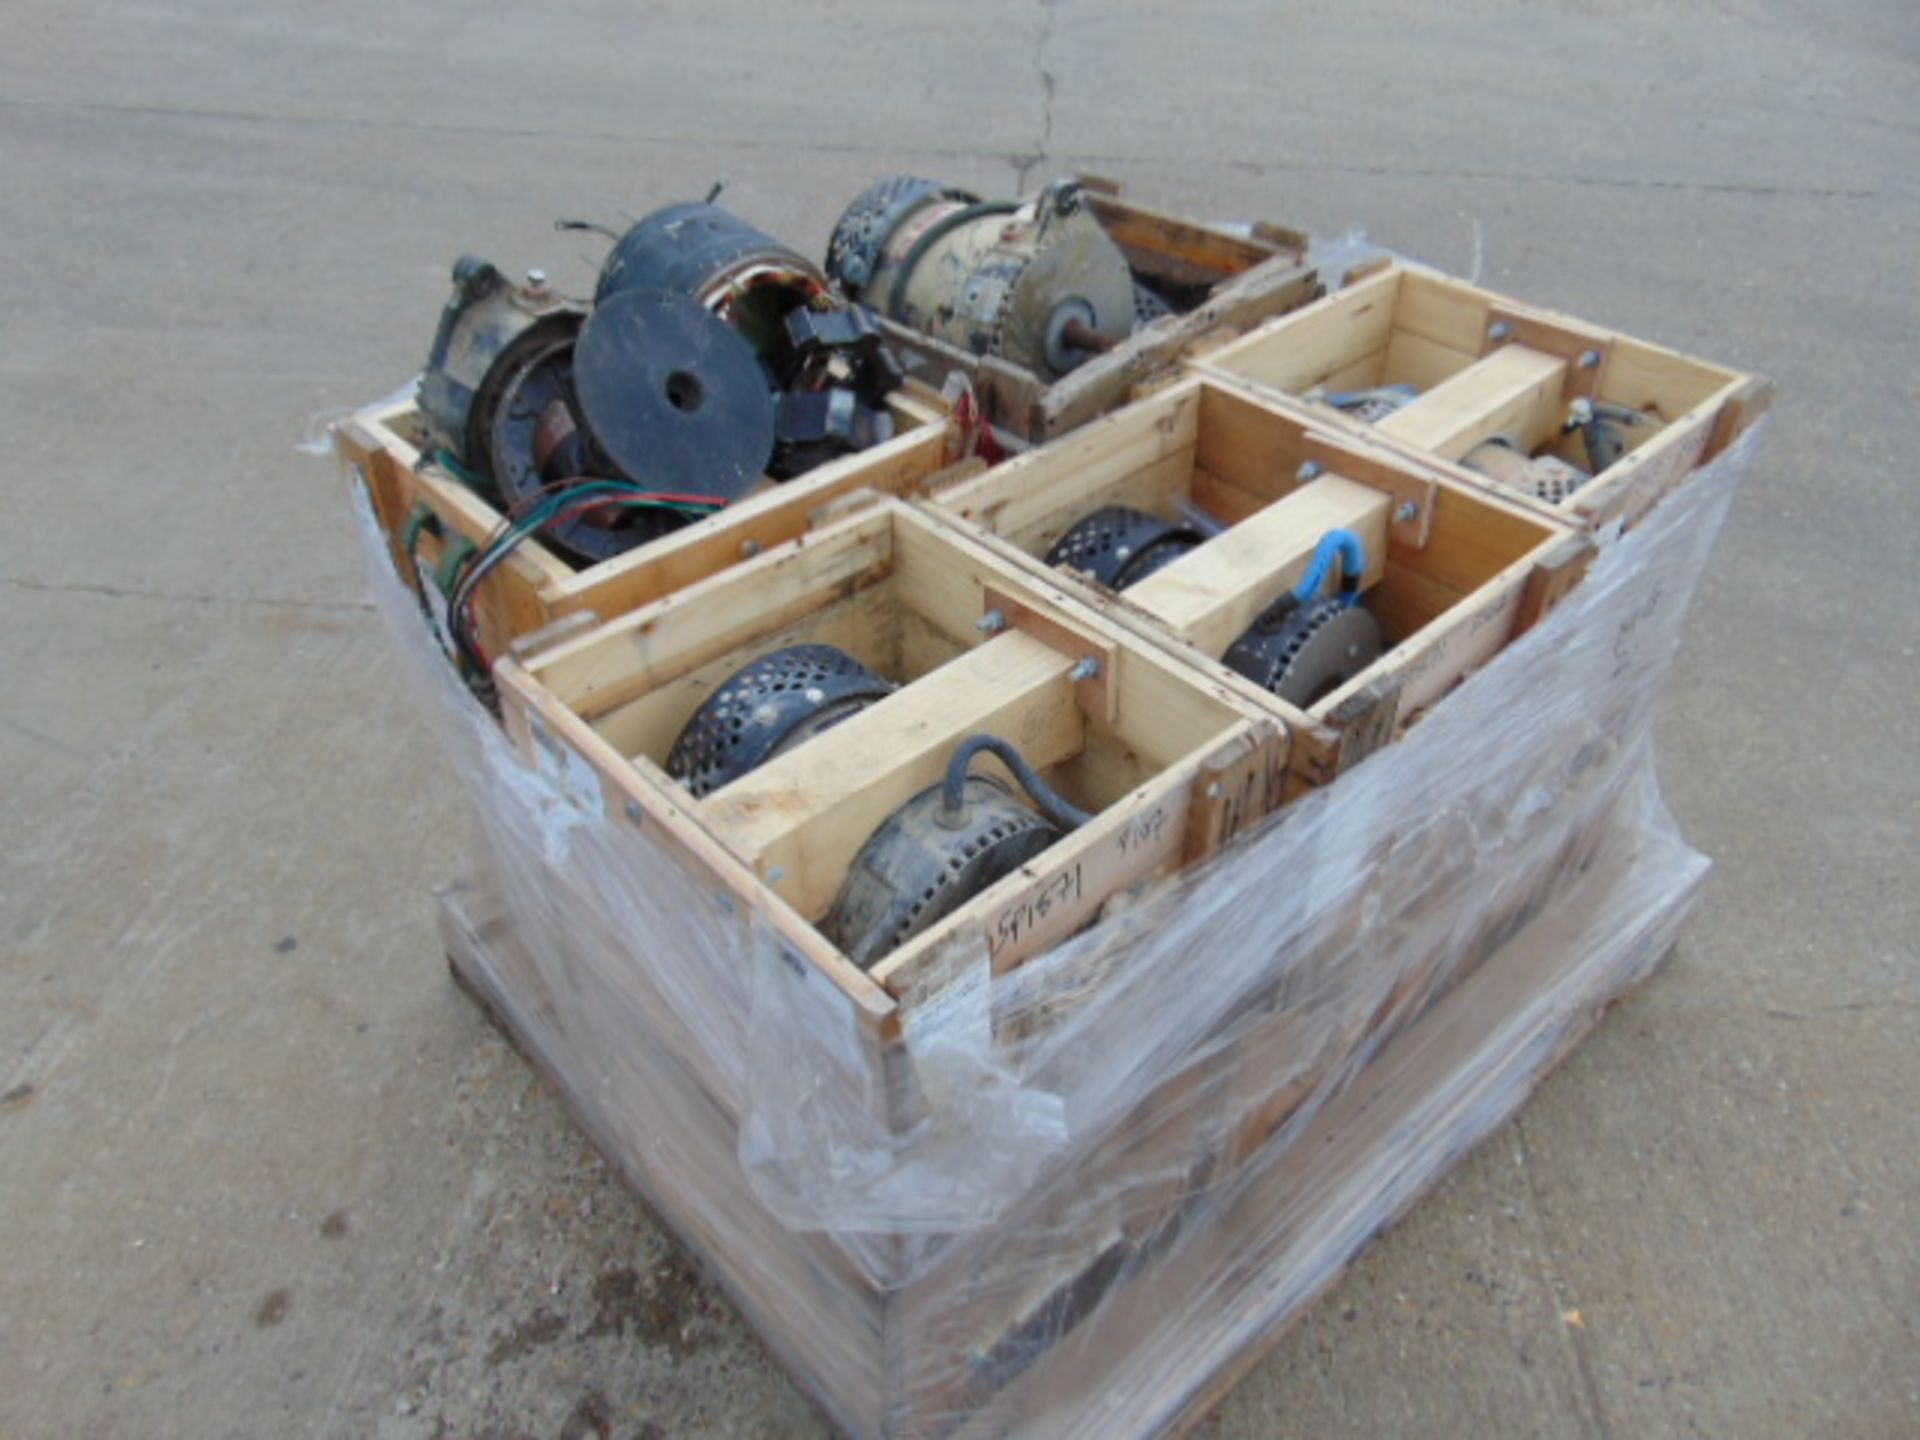 12 x Takeout Alternators for Combat Liasion Vehicle - Image 5 of 7